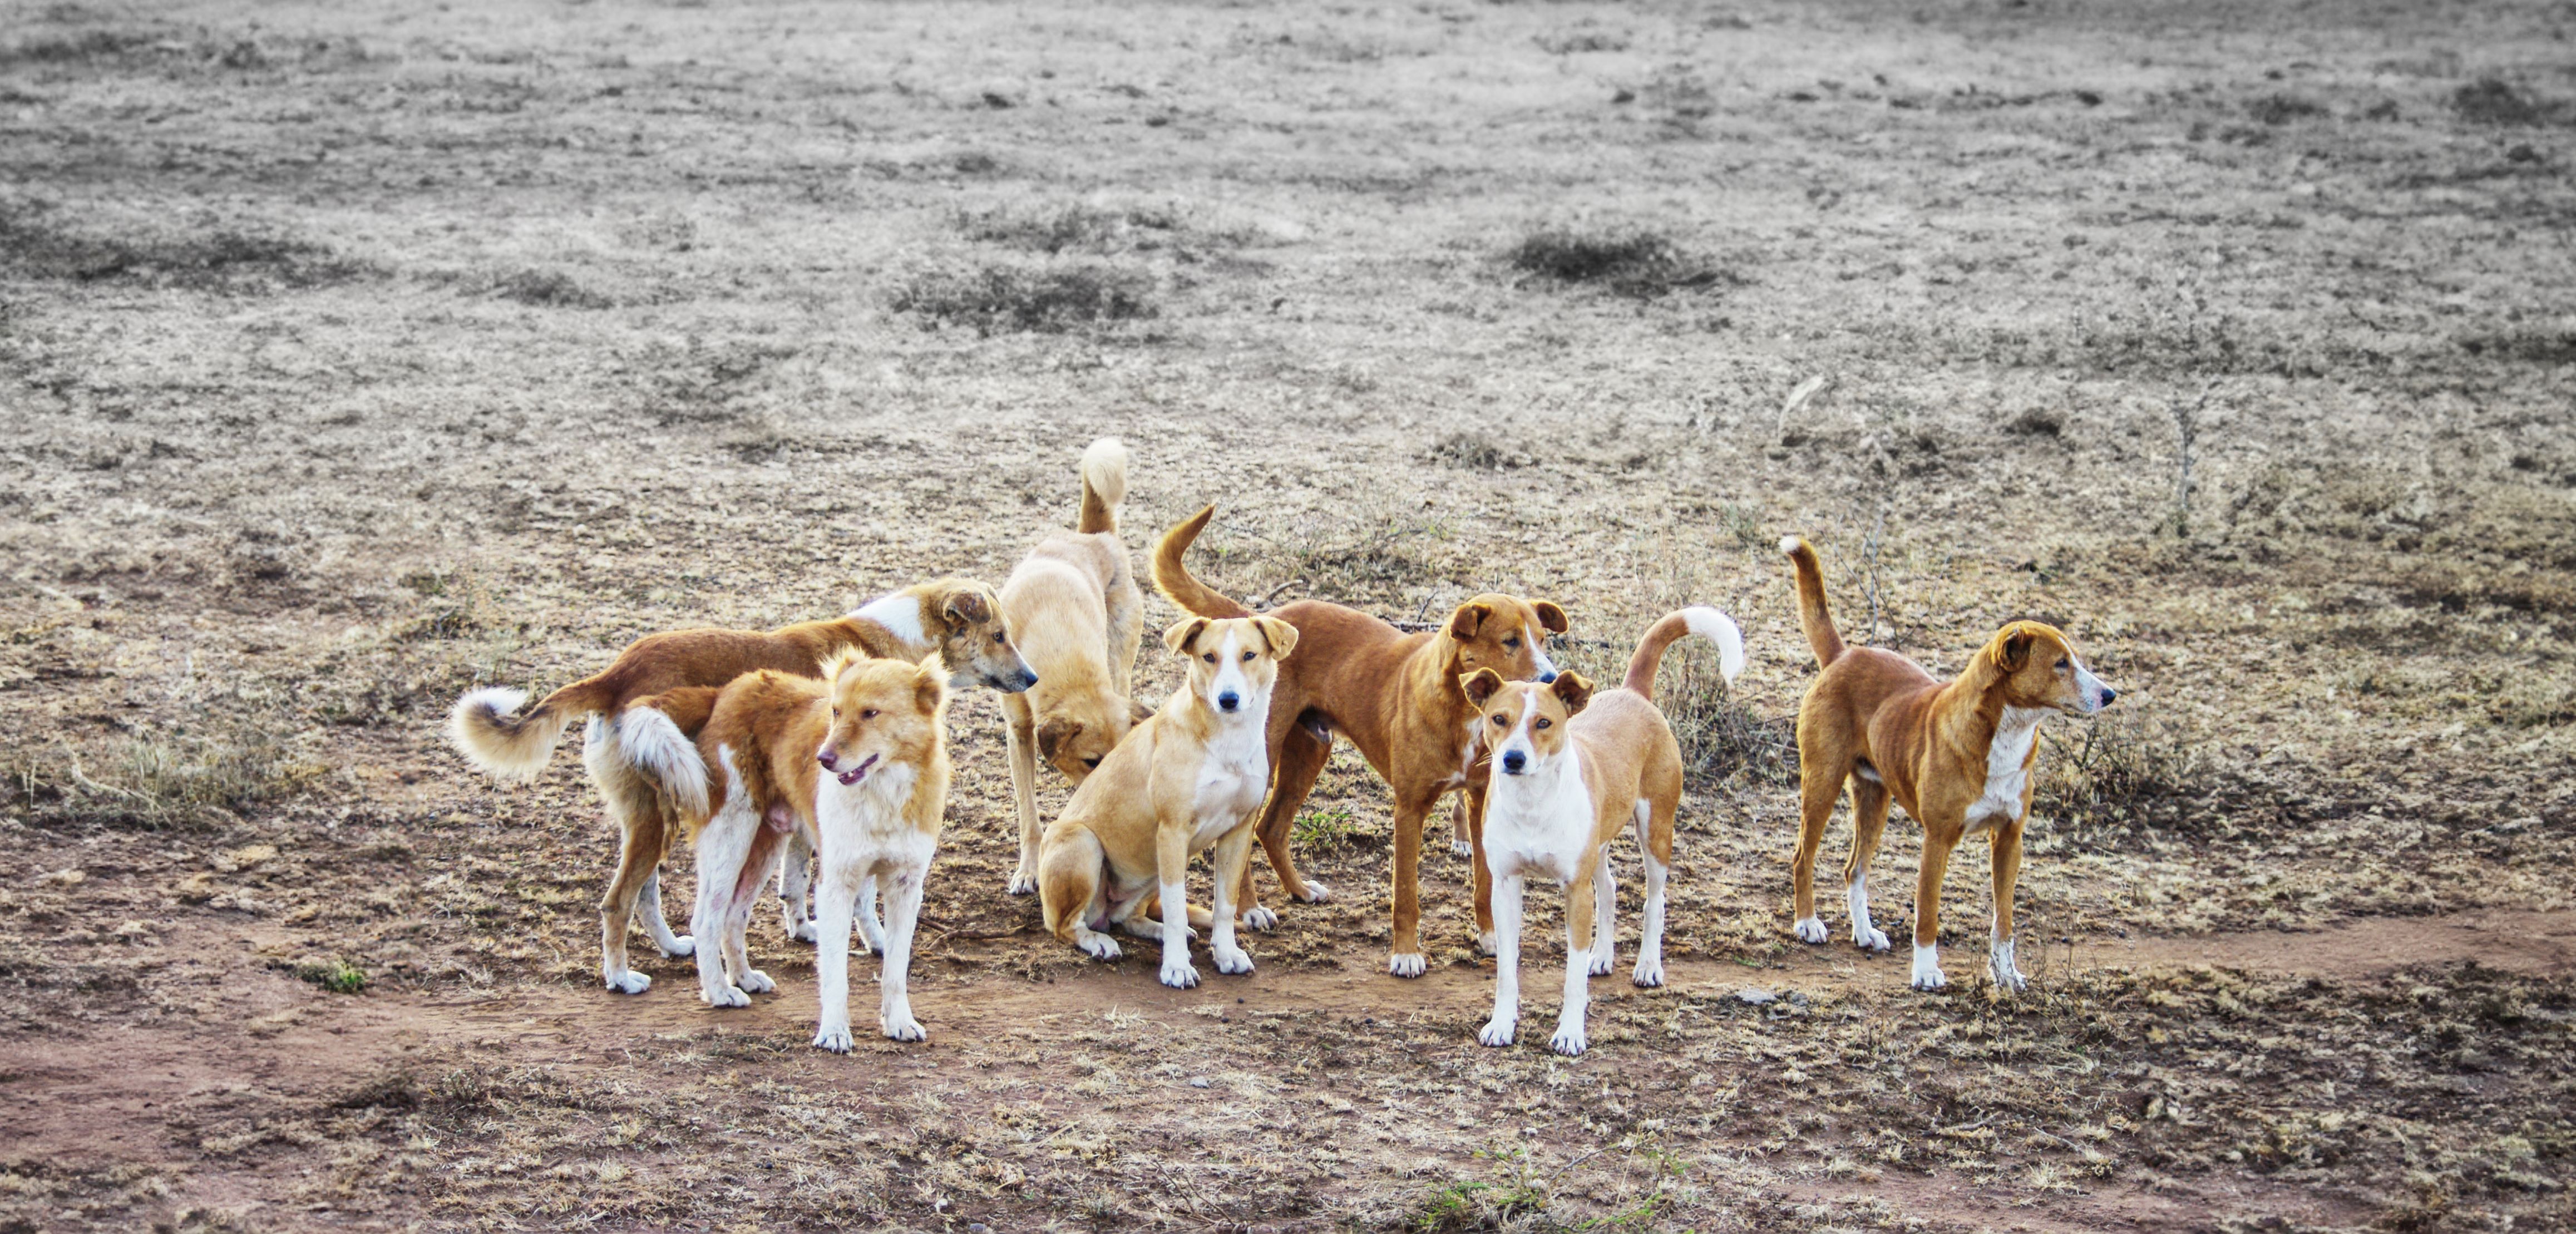 Department Of Municipalities And Transport Launches Awareness Campaign To Manage Stray Dogs And Promote Public Safety